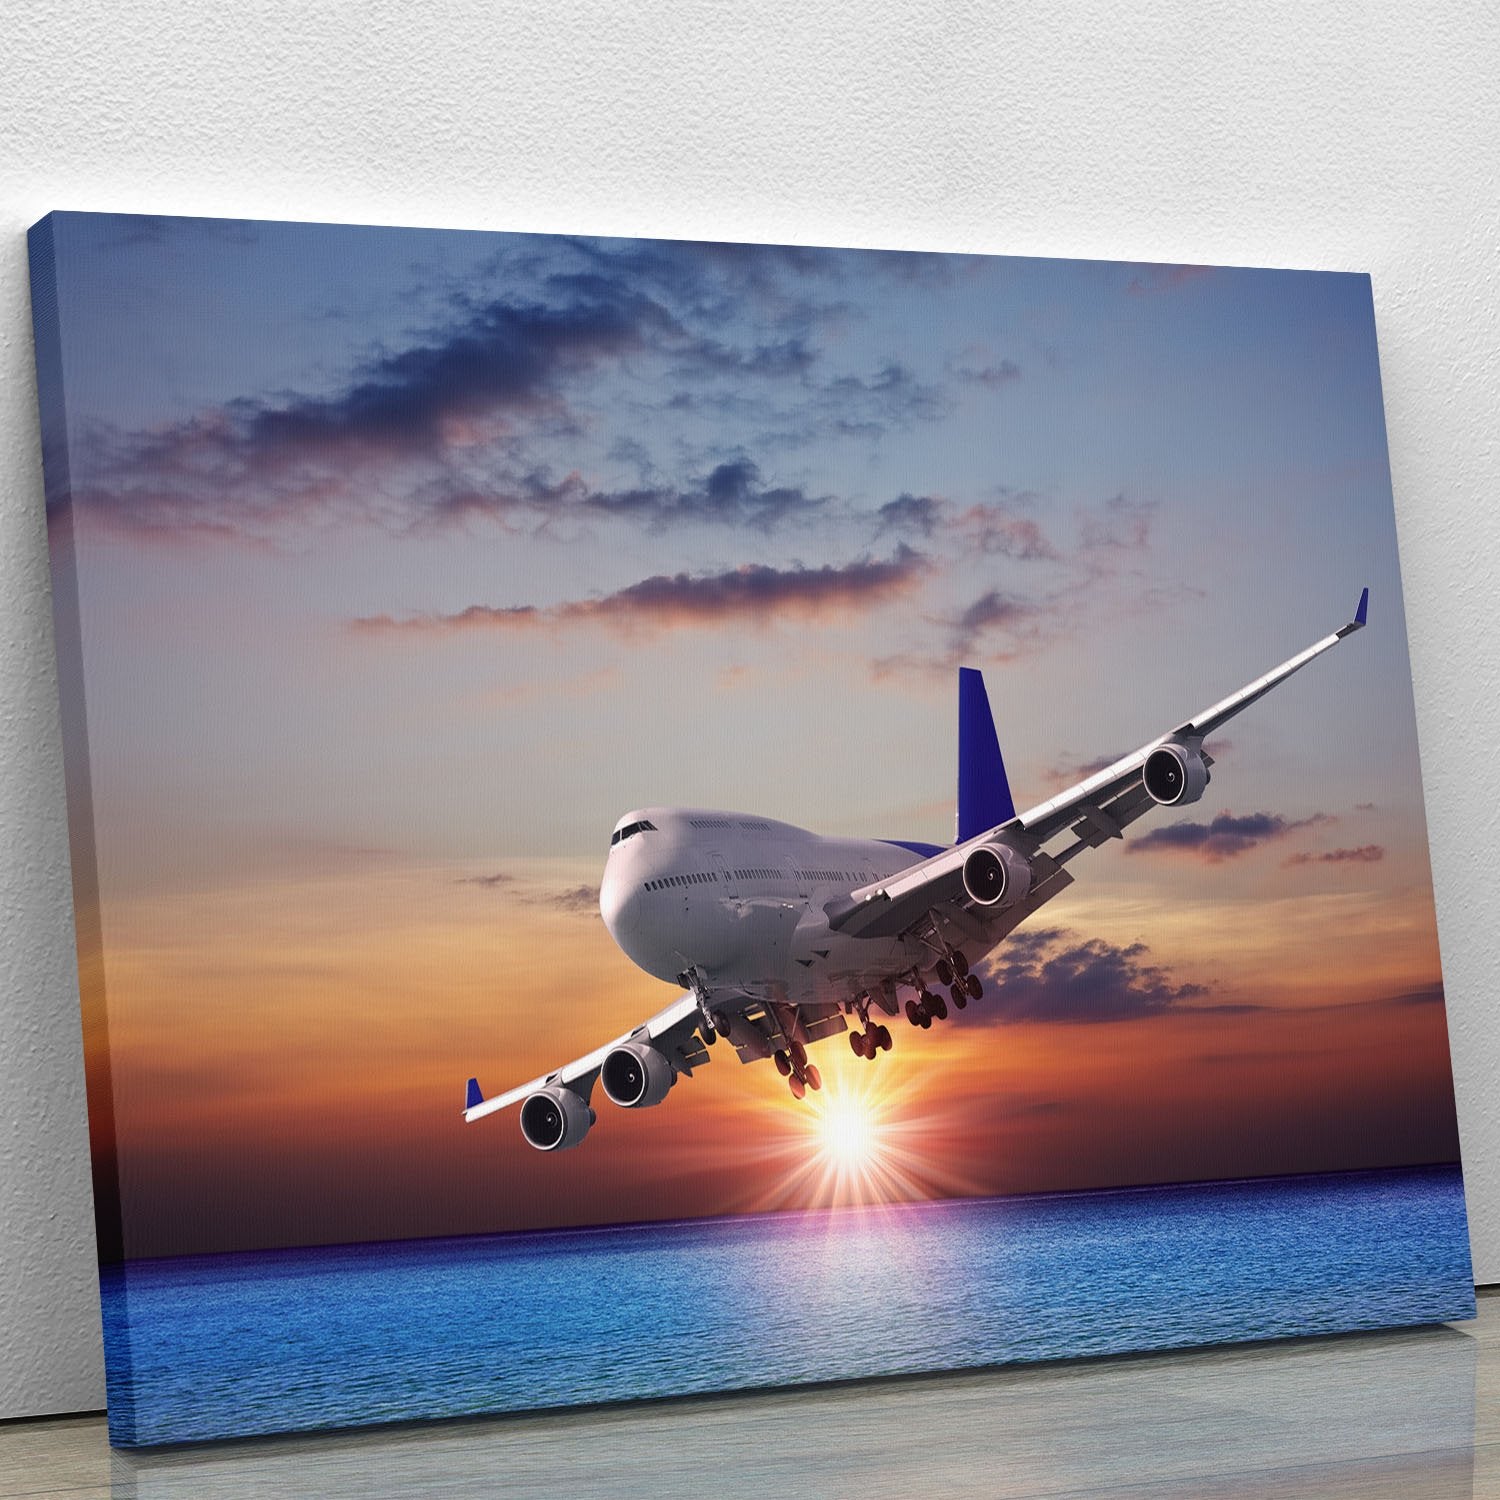 Jet liner over the sea at dusk Canvas Print or Poster